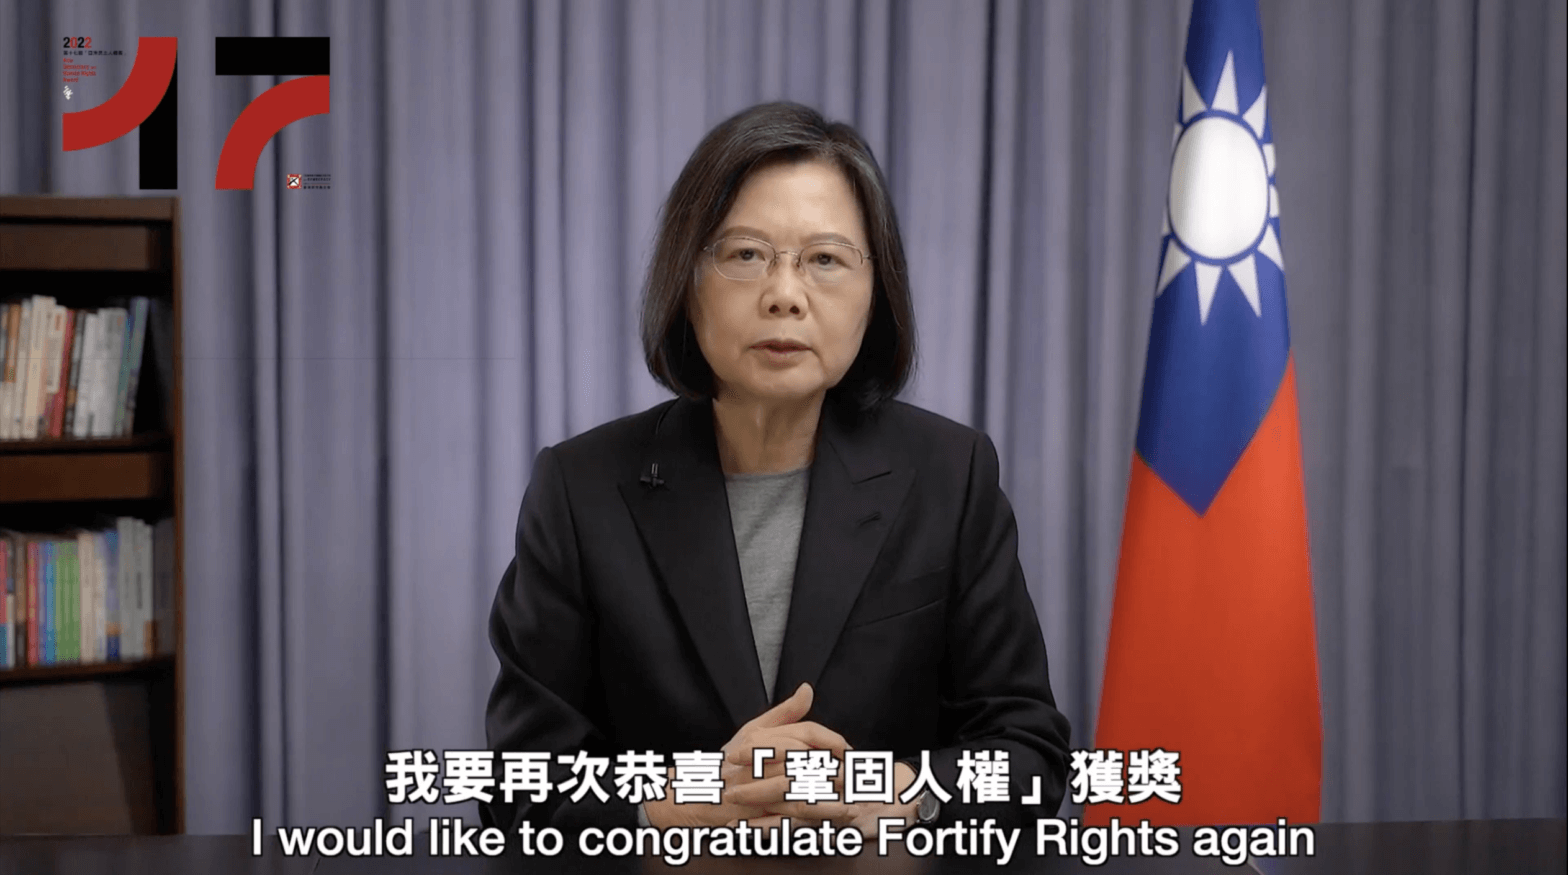 Fortify Rights Receives 2022 Asia Democracy and Human Rights Award